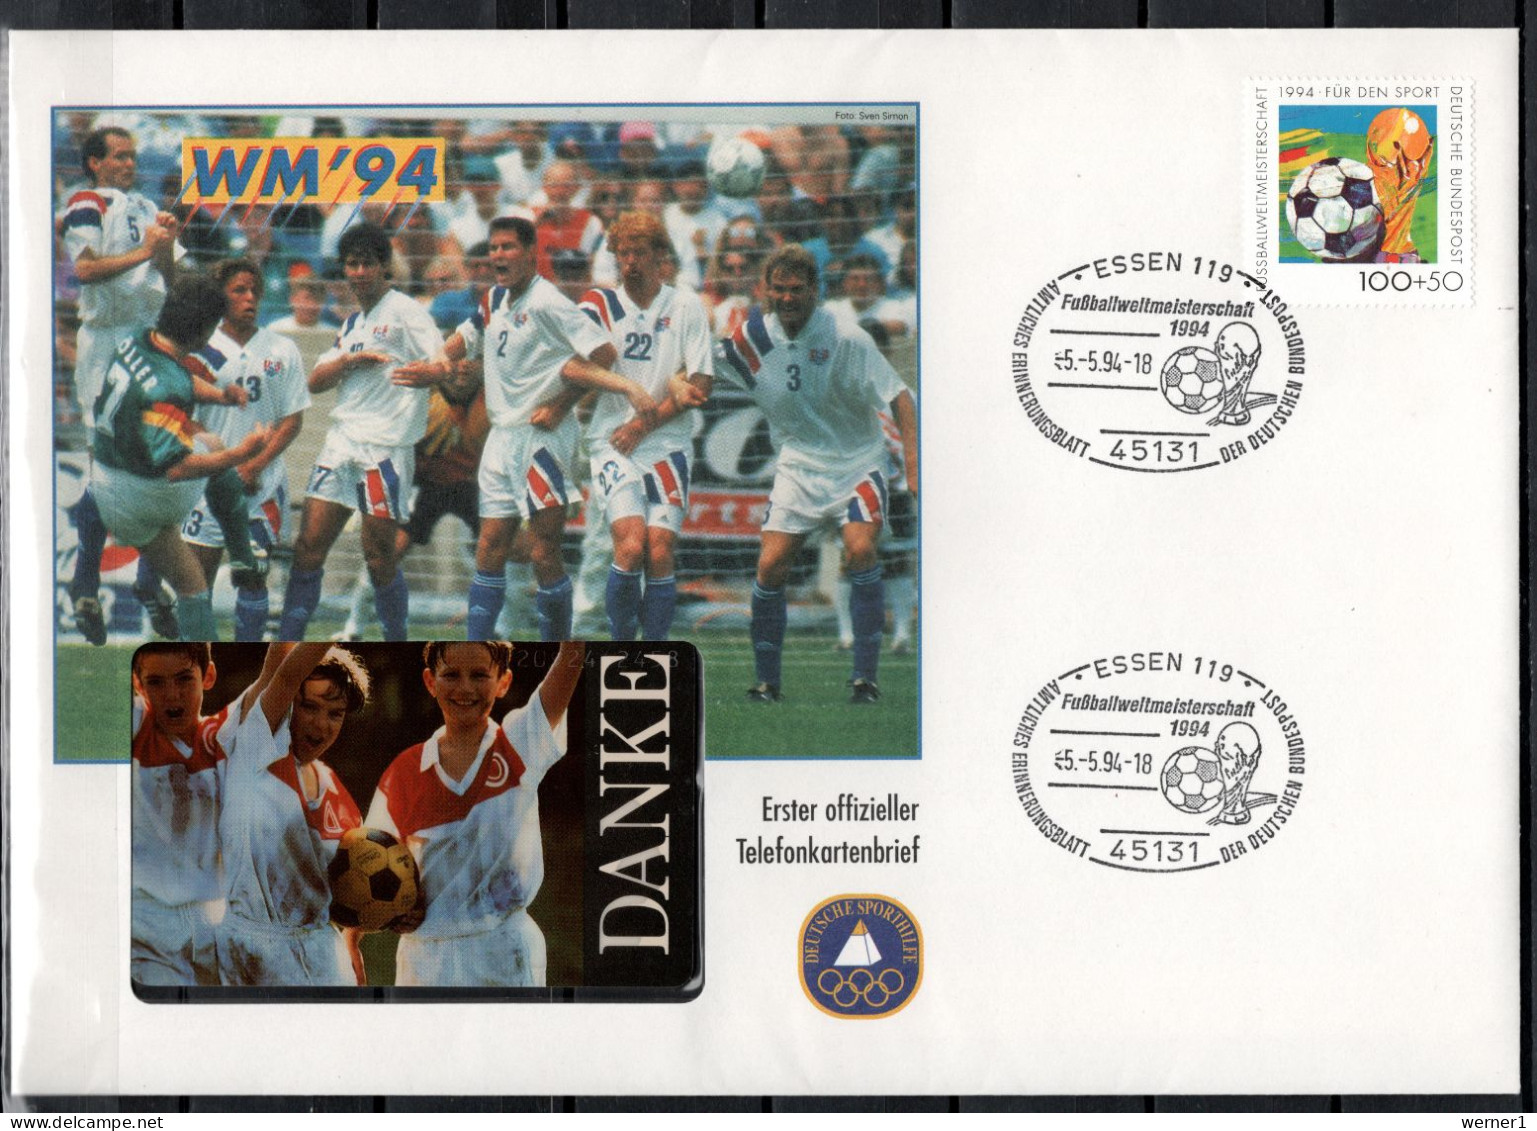 Germany 1994 Football Soccer World Cup Commemorative Cover With Telephone Card - 1994 – Vereinigte Staaten